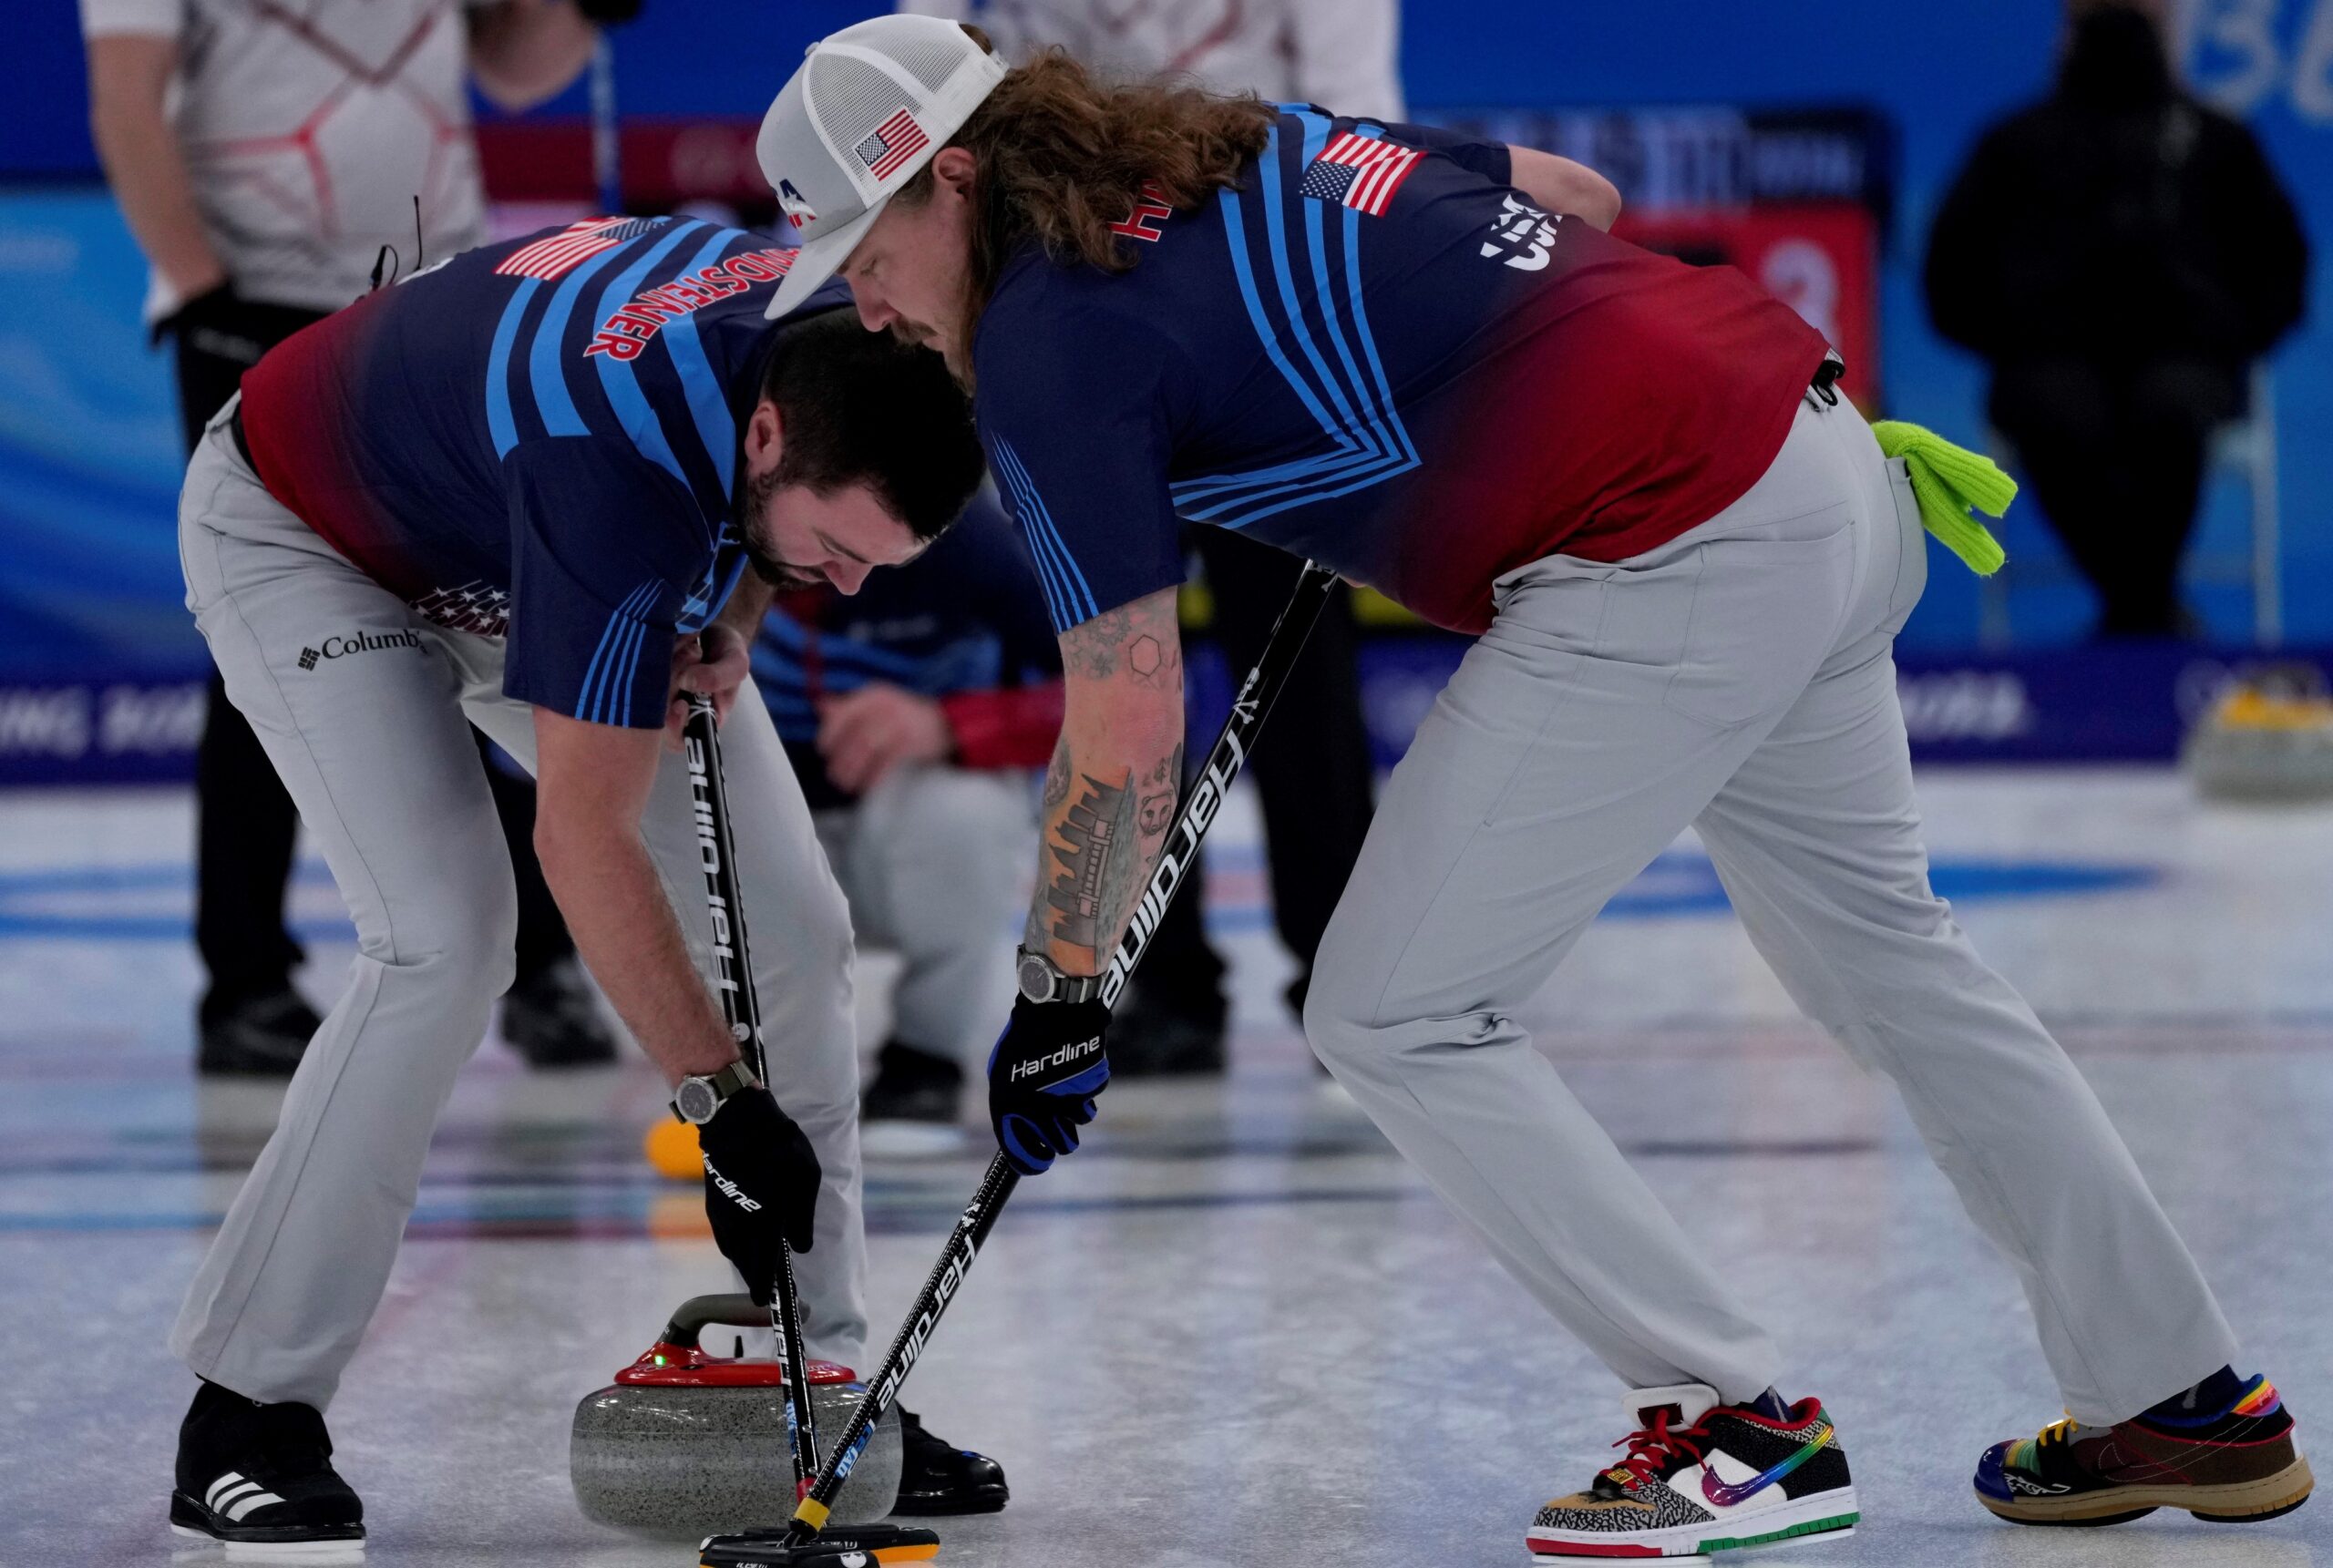 US men’s Olympic curling team wins first game against Russia